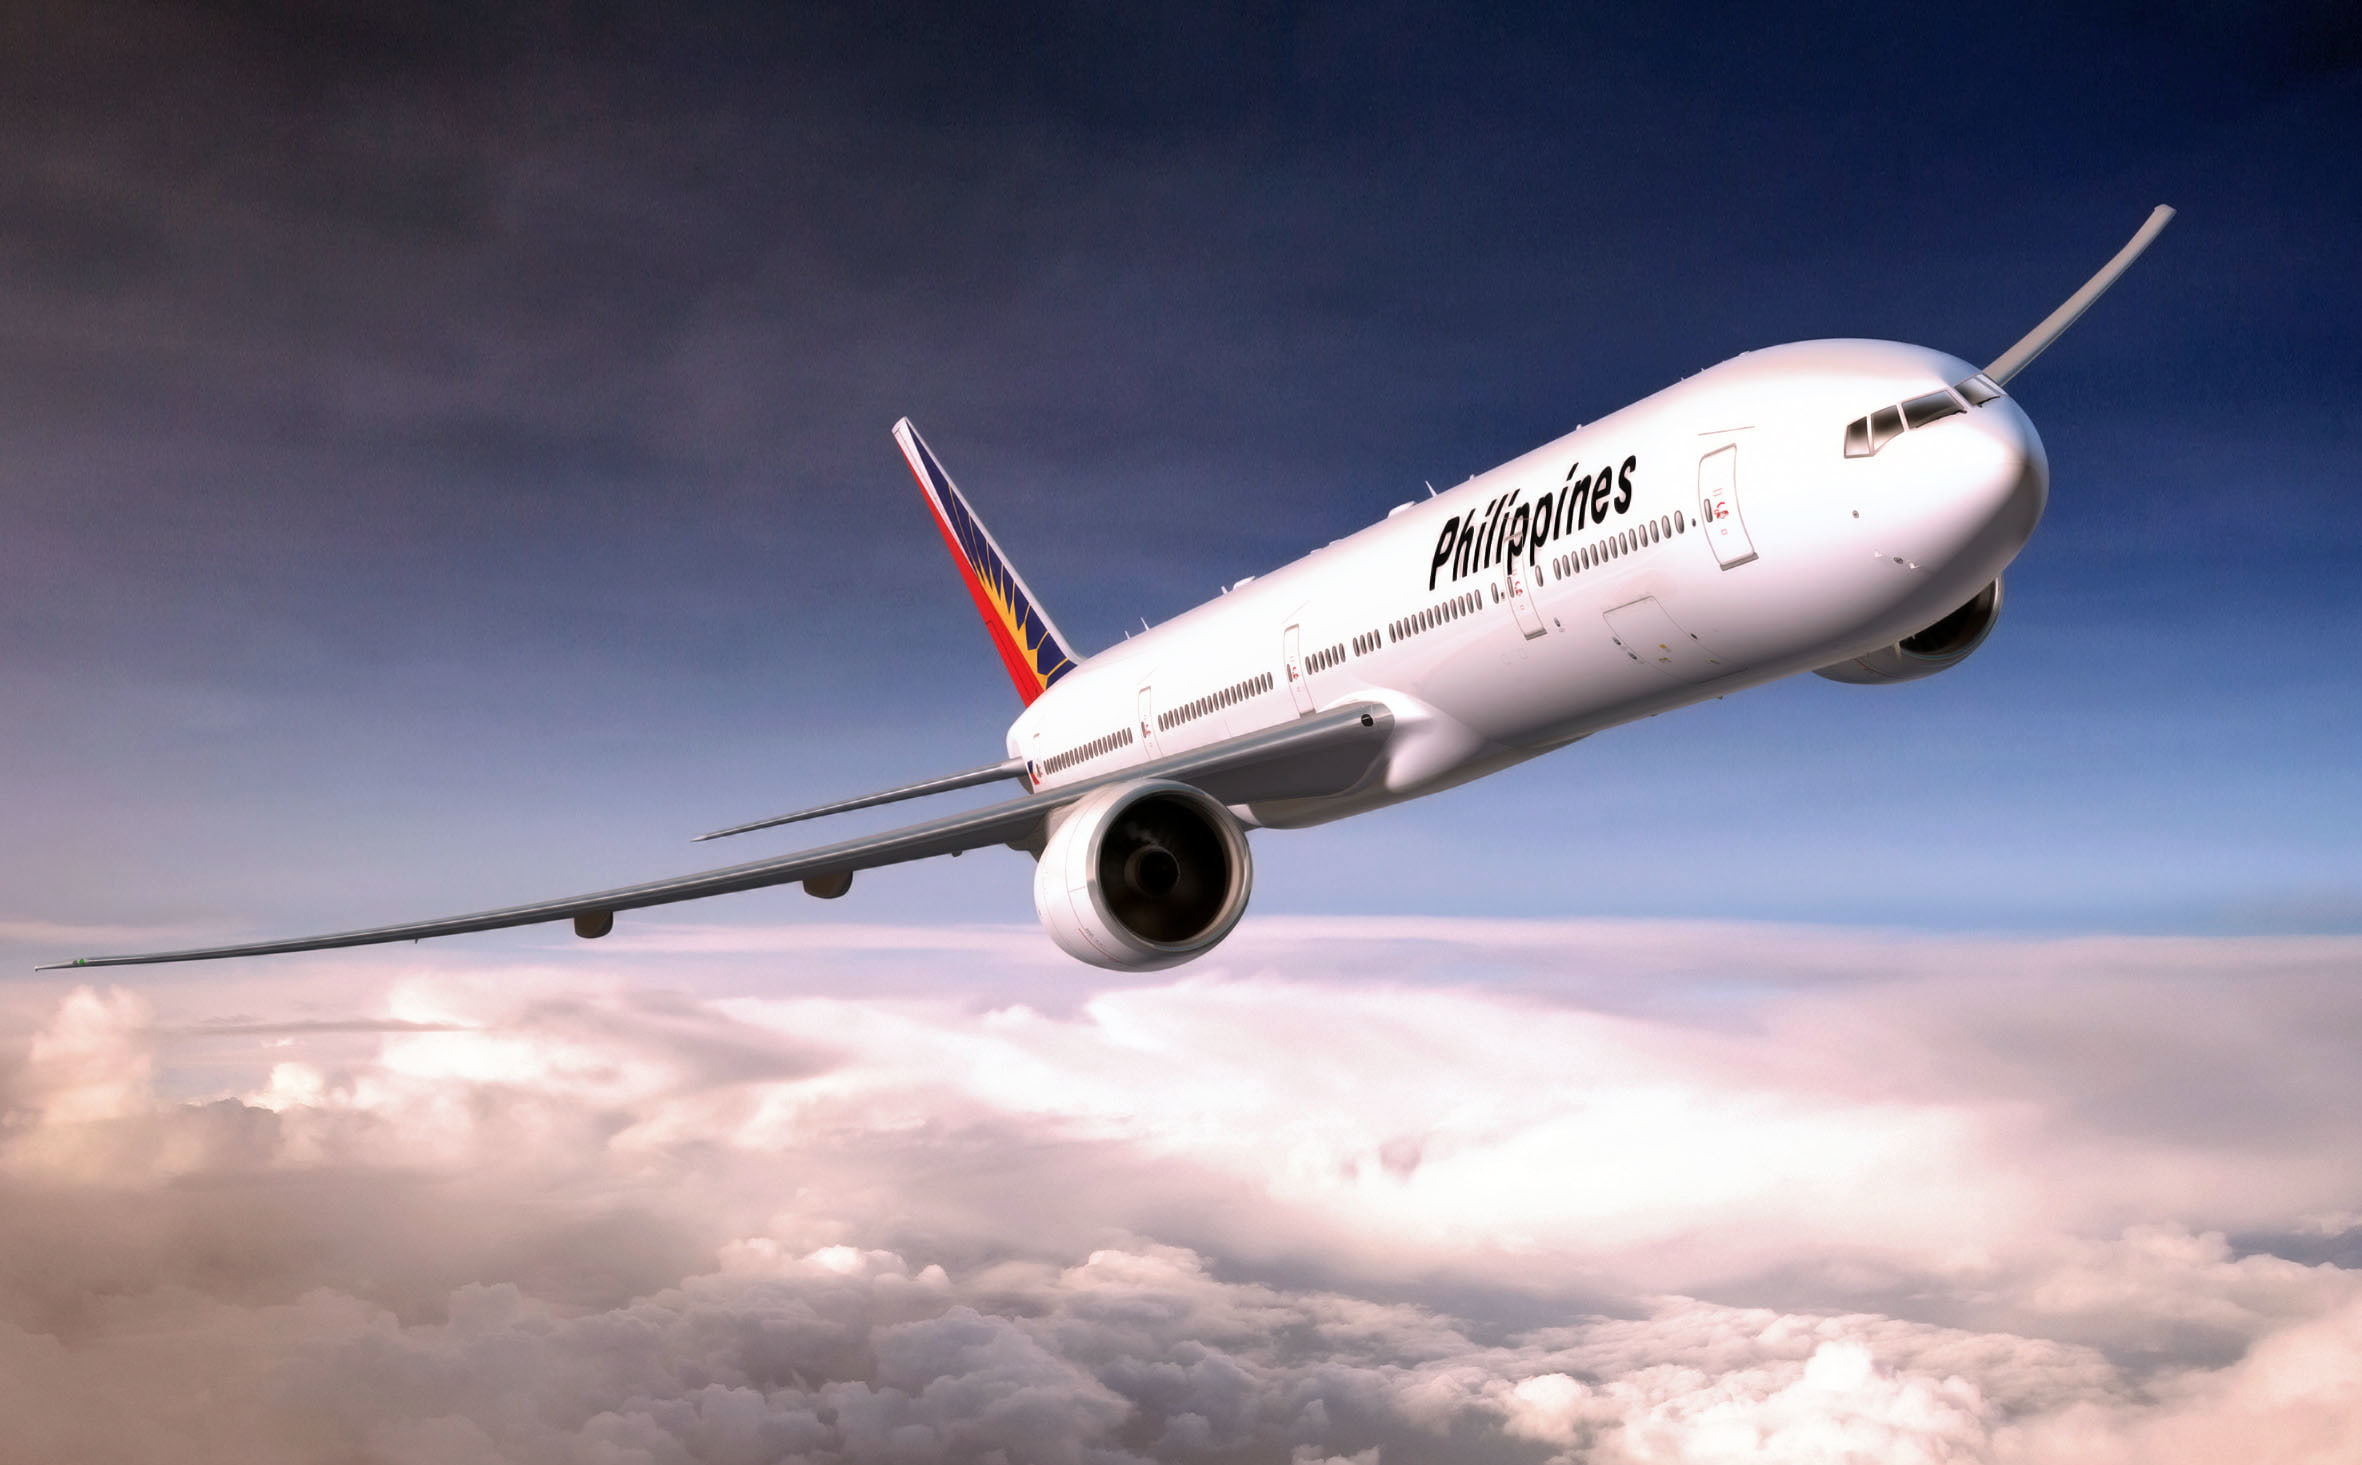 Philippine Airlines airliner, The sky, Clouds, White, The plane